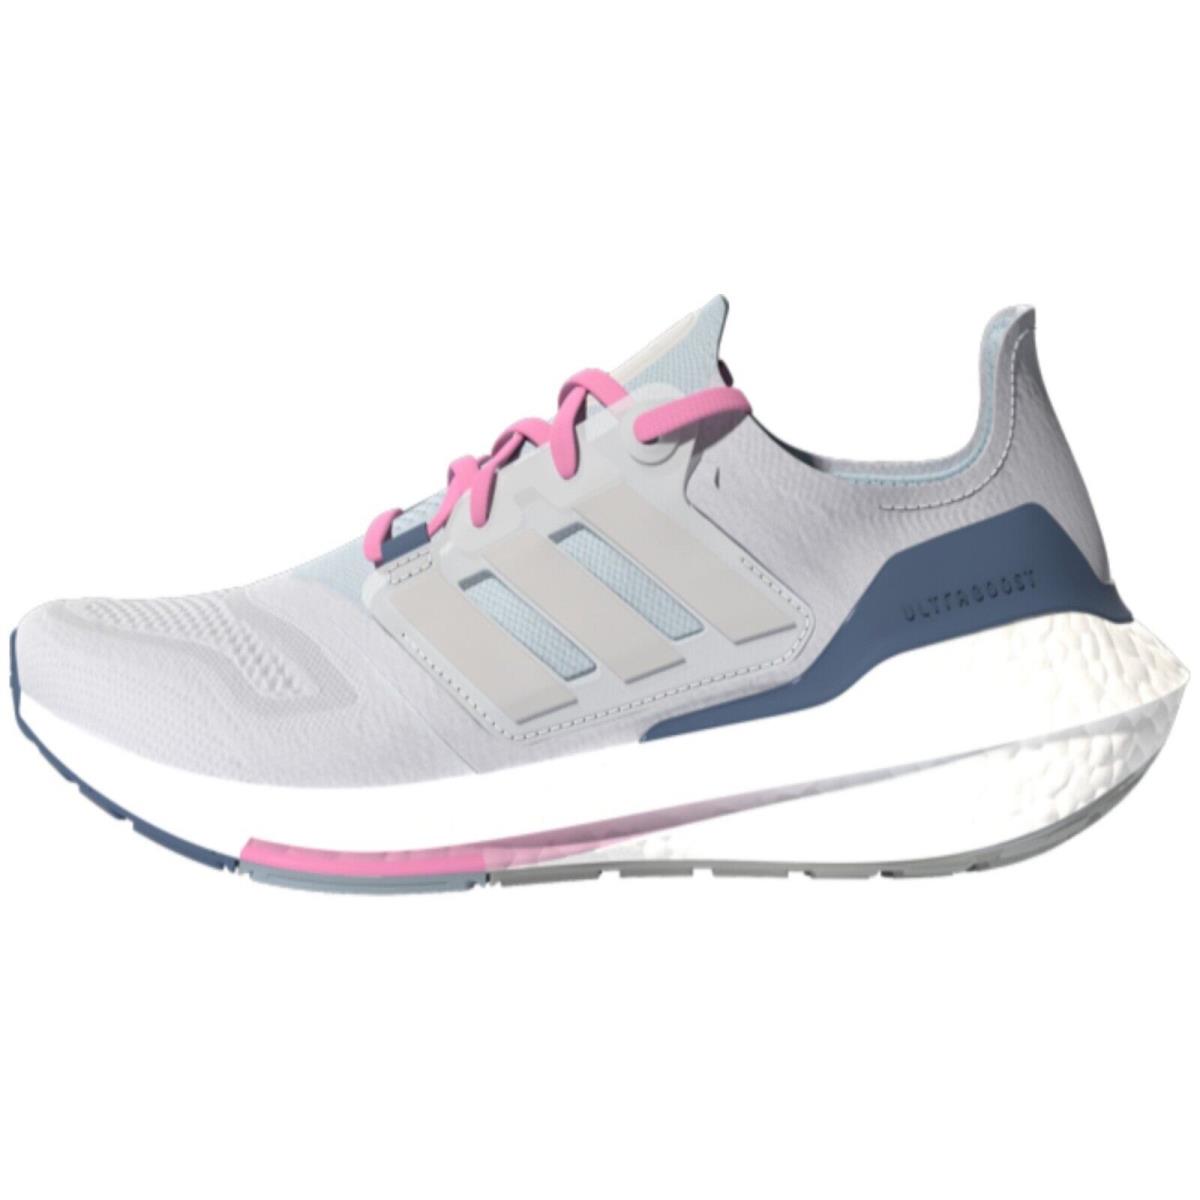 Adidas Women`s Ultraboost 22 Running Shoe Size 6.5 - White/Grey/Almost Blue